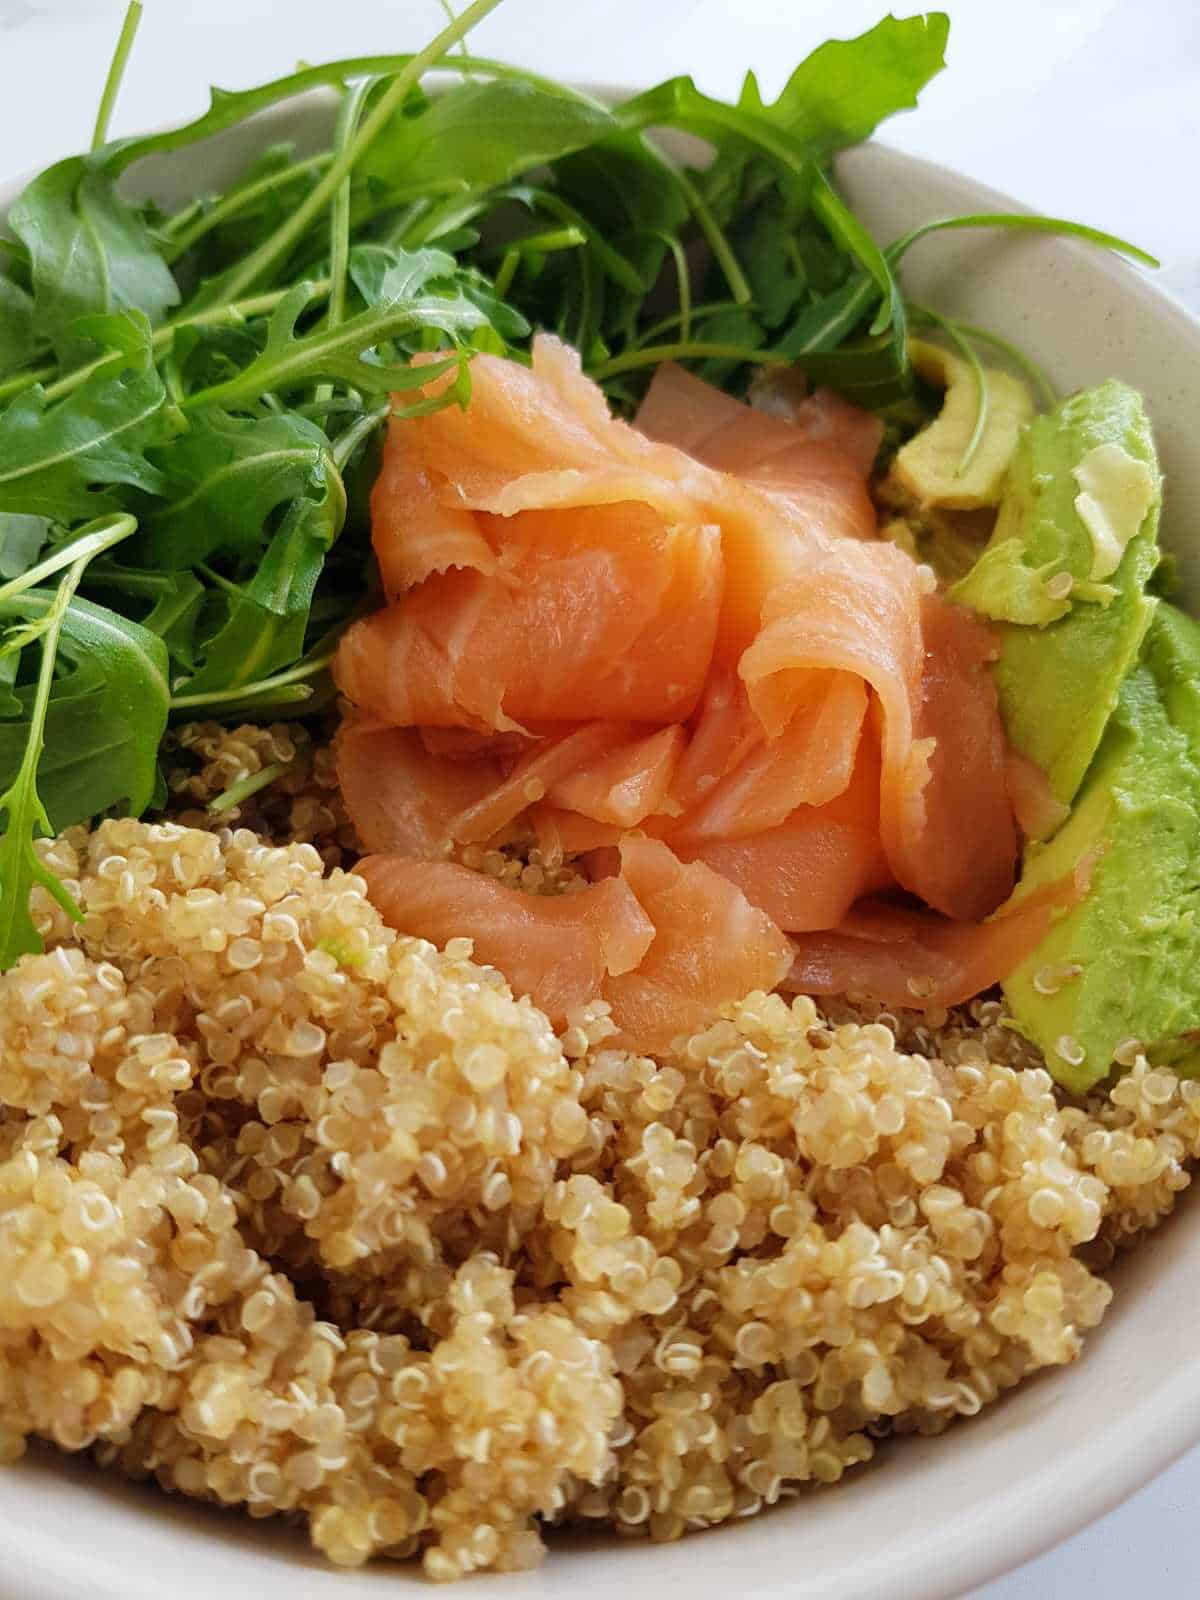 Smoked salmon and quinoa salad with avocado and arugula in a bowl.